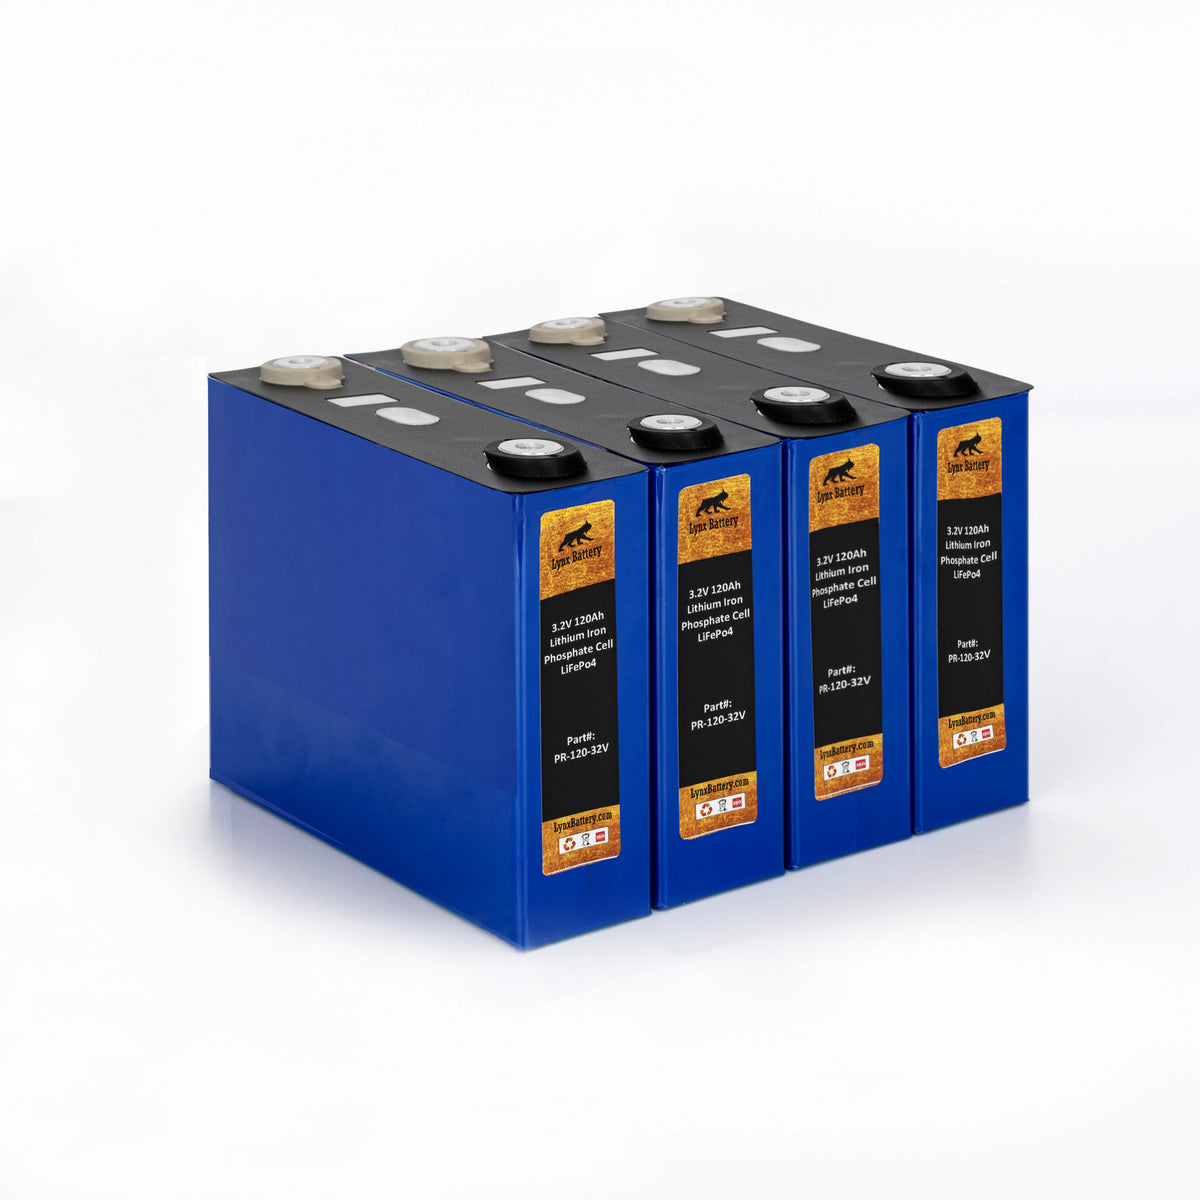 Lynx Battery 12V 100Ah Lithium Iron Phosphate LiFePO4 Prismatic Deep Cell Battery - Set of 4-3.2V Cells with 3 Bus Bars and 8 Lug Nuts - for RV, Solar, Marine & Off-Grid Applications